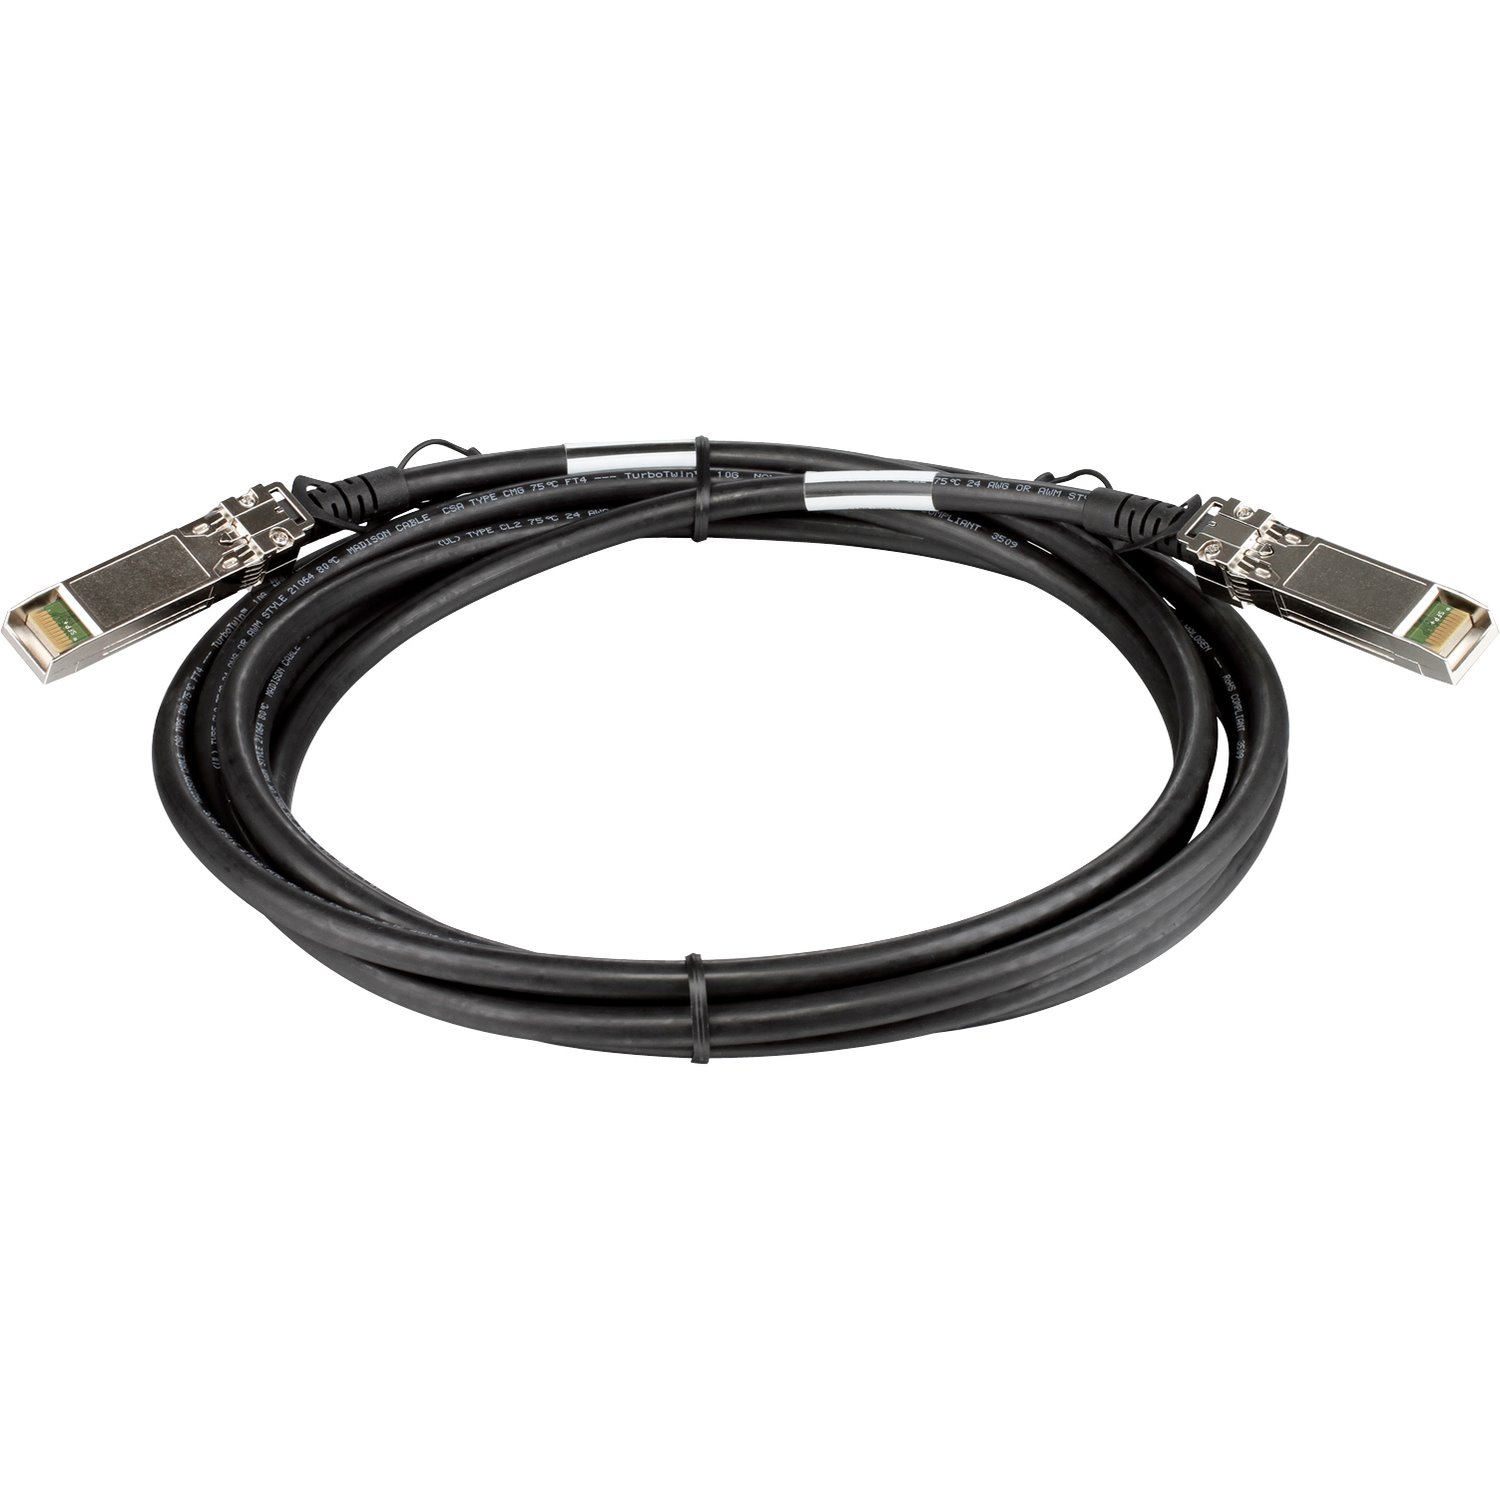 D-Link 3 m Network Cable